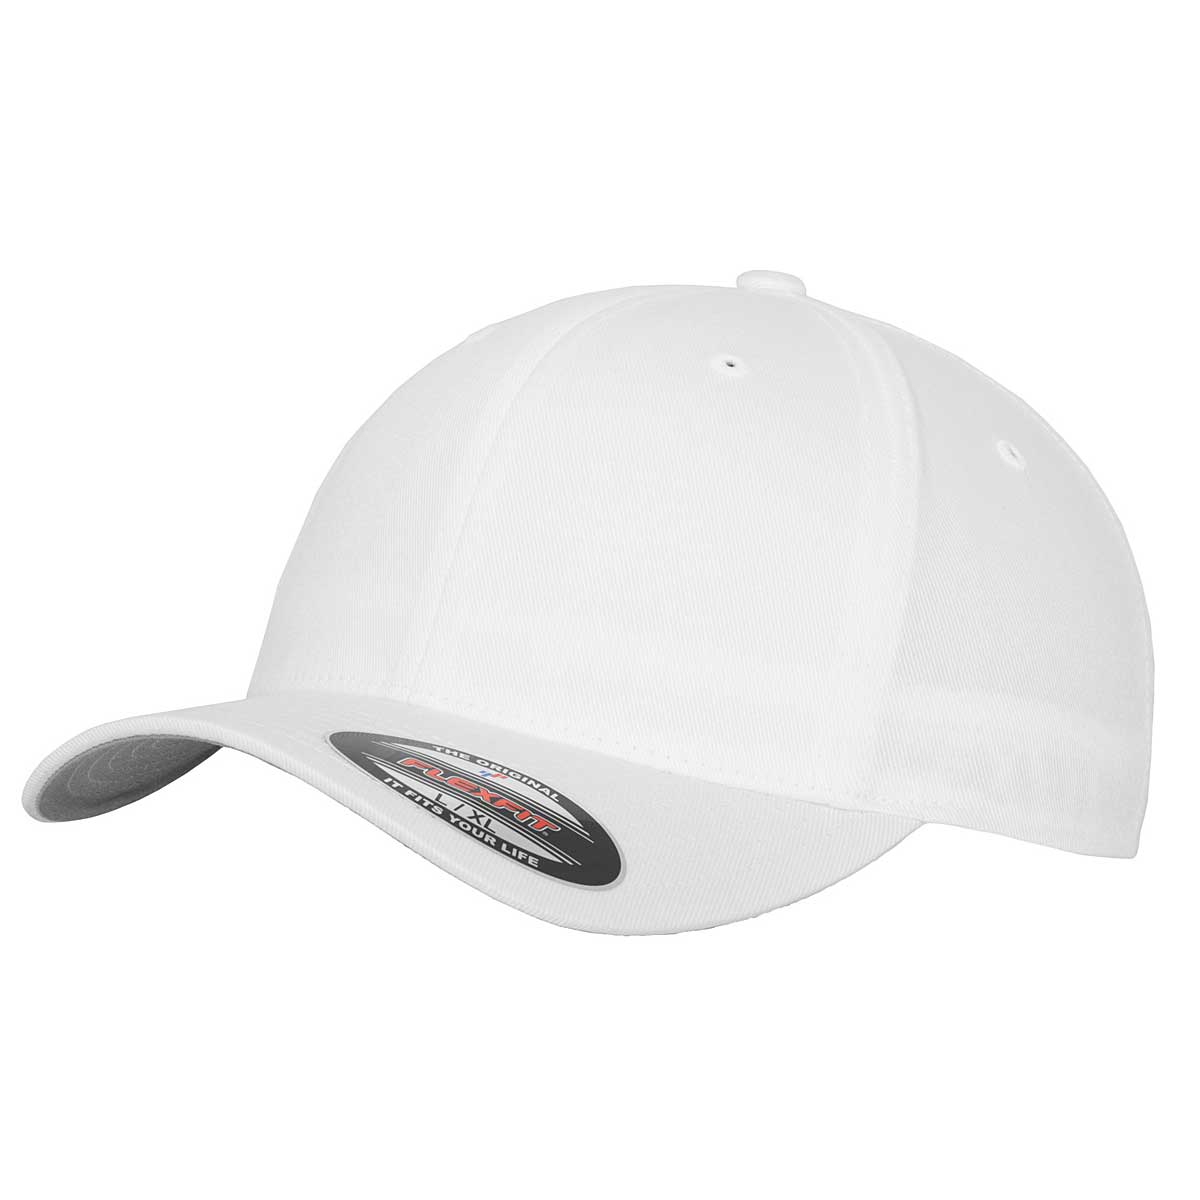 GBP 12.90 on Cheap Ilunionhotels Jordan Outlet! - Buy WOOLY COMBED CAP -  logo-embroidered jersey cap Grigio